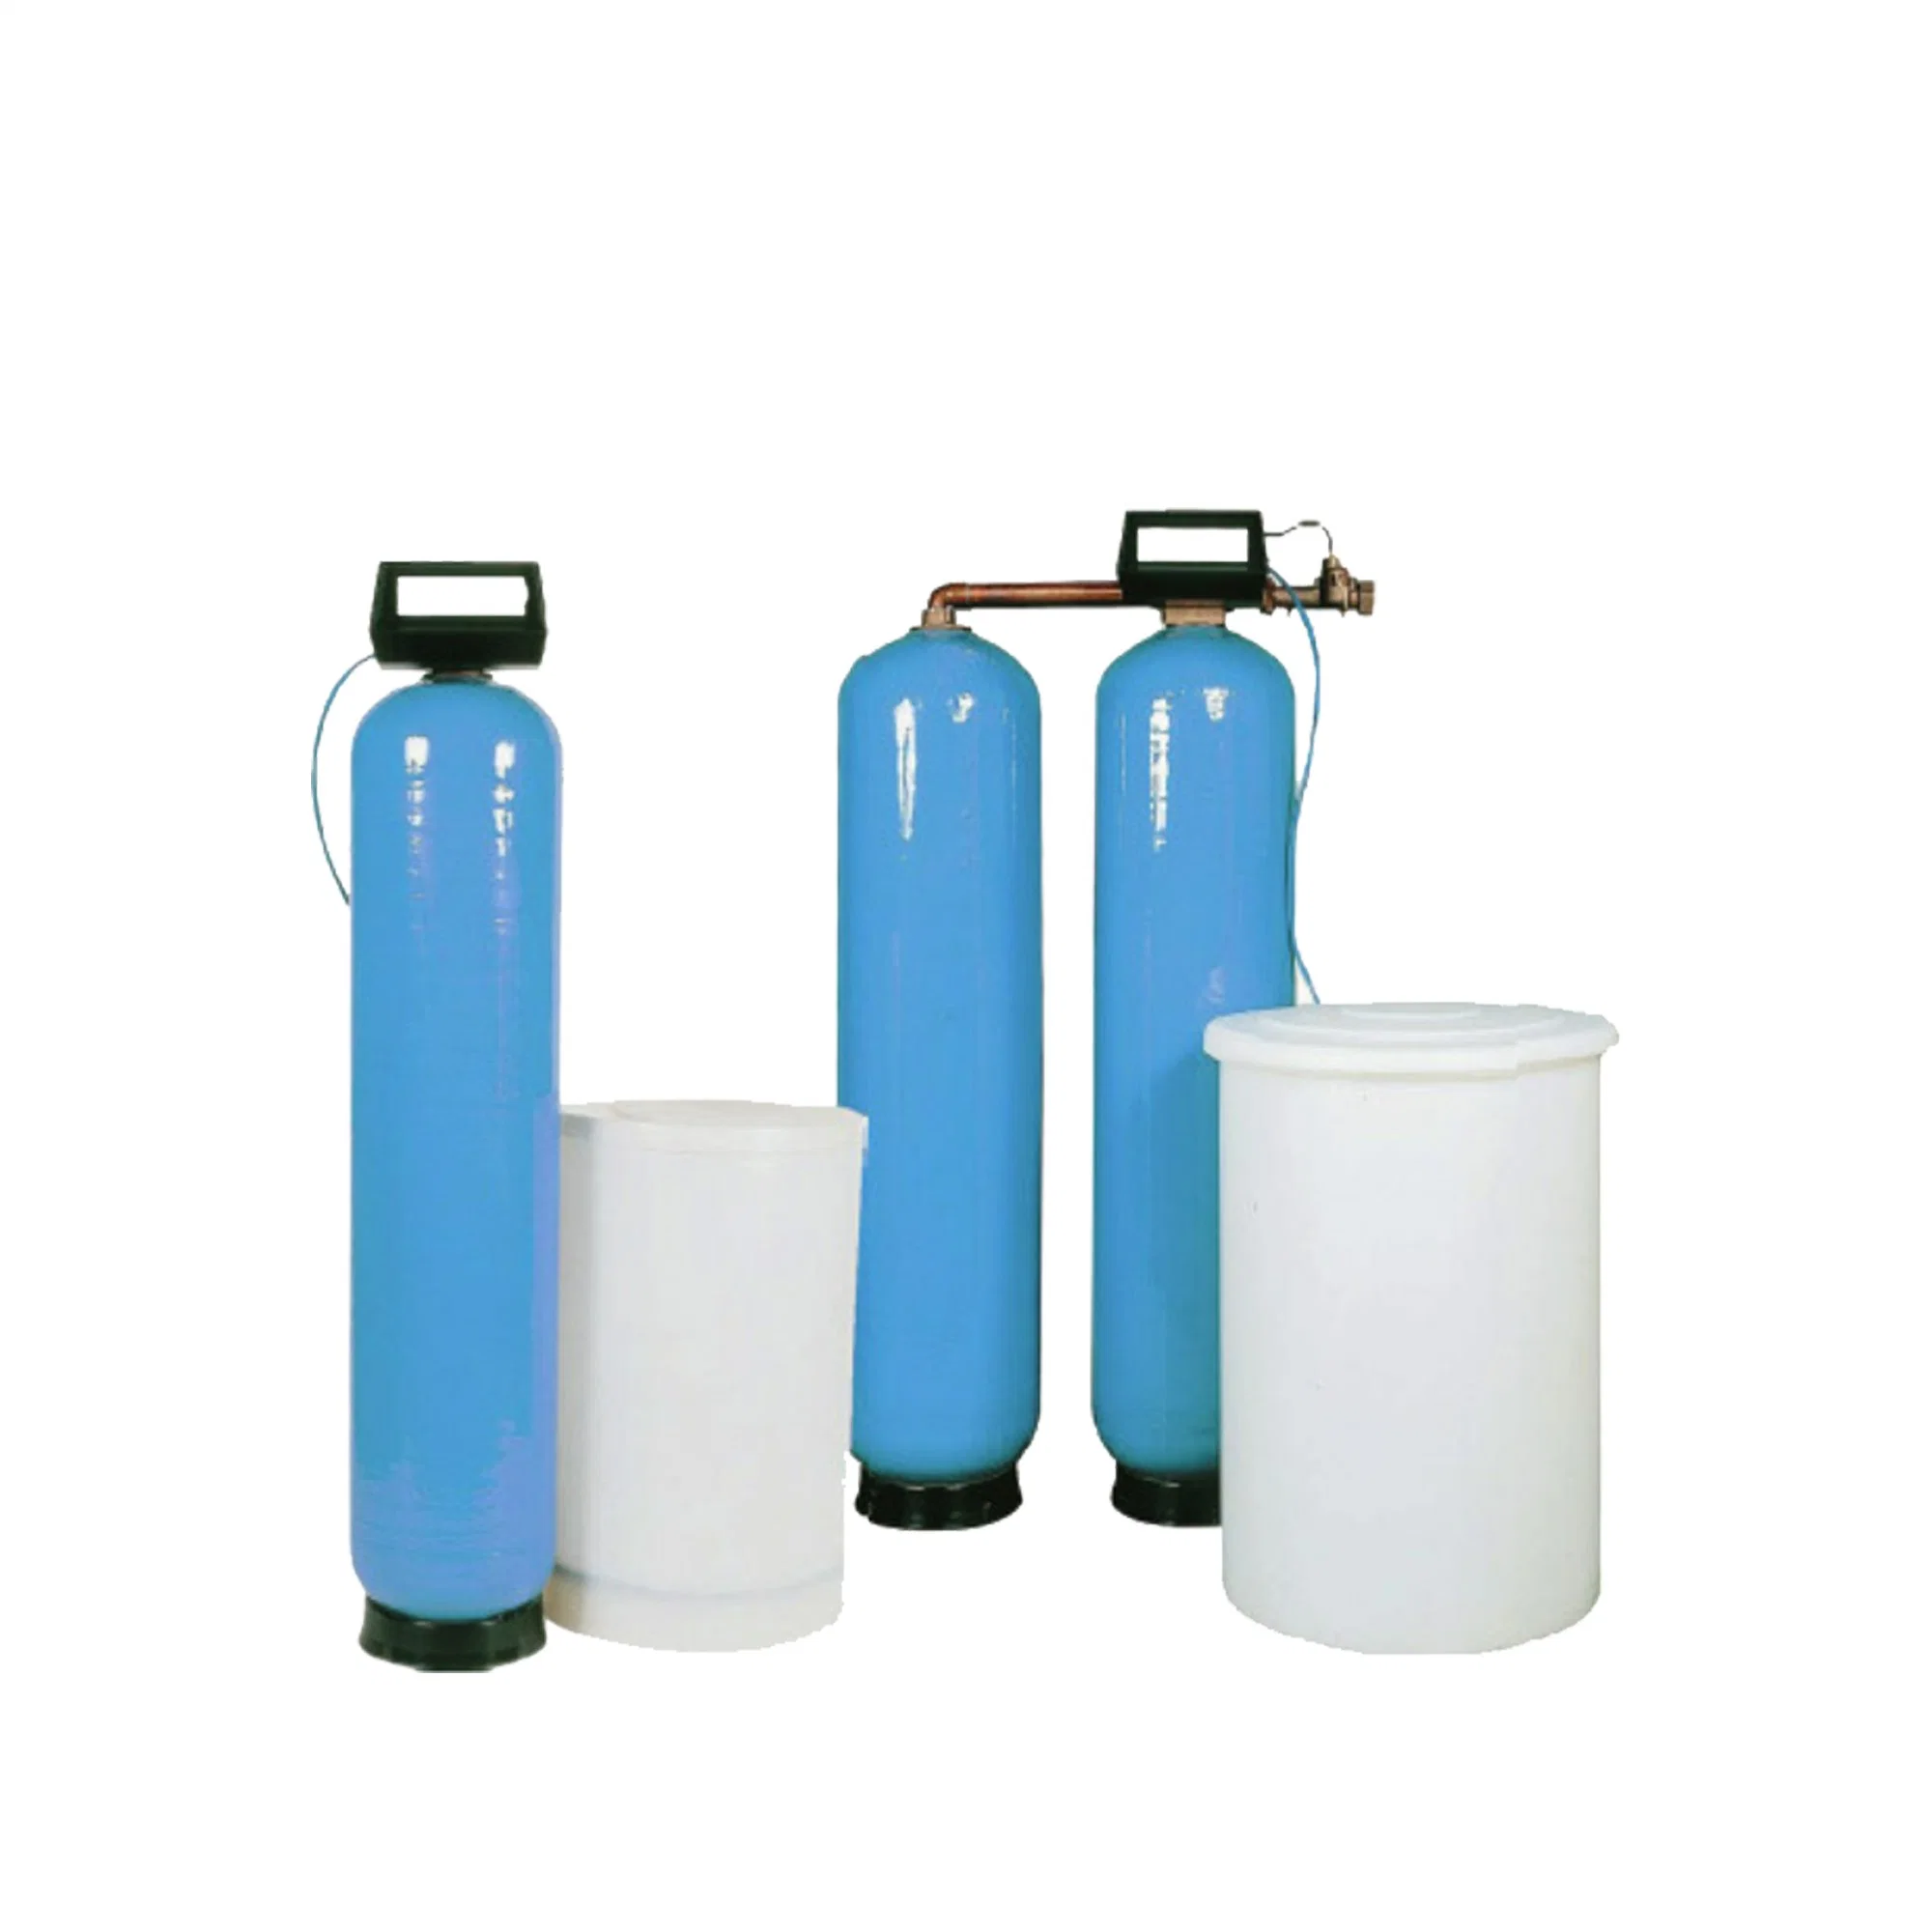 Industrial Water Softener Water Treatment Equipment Automatic Control for Hard Water